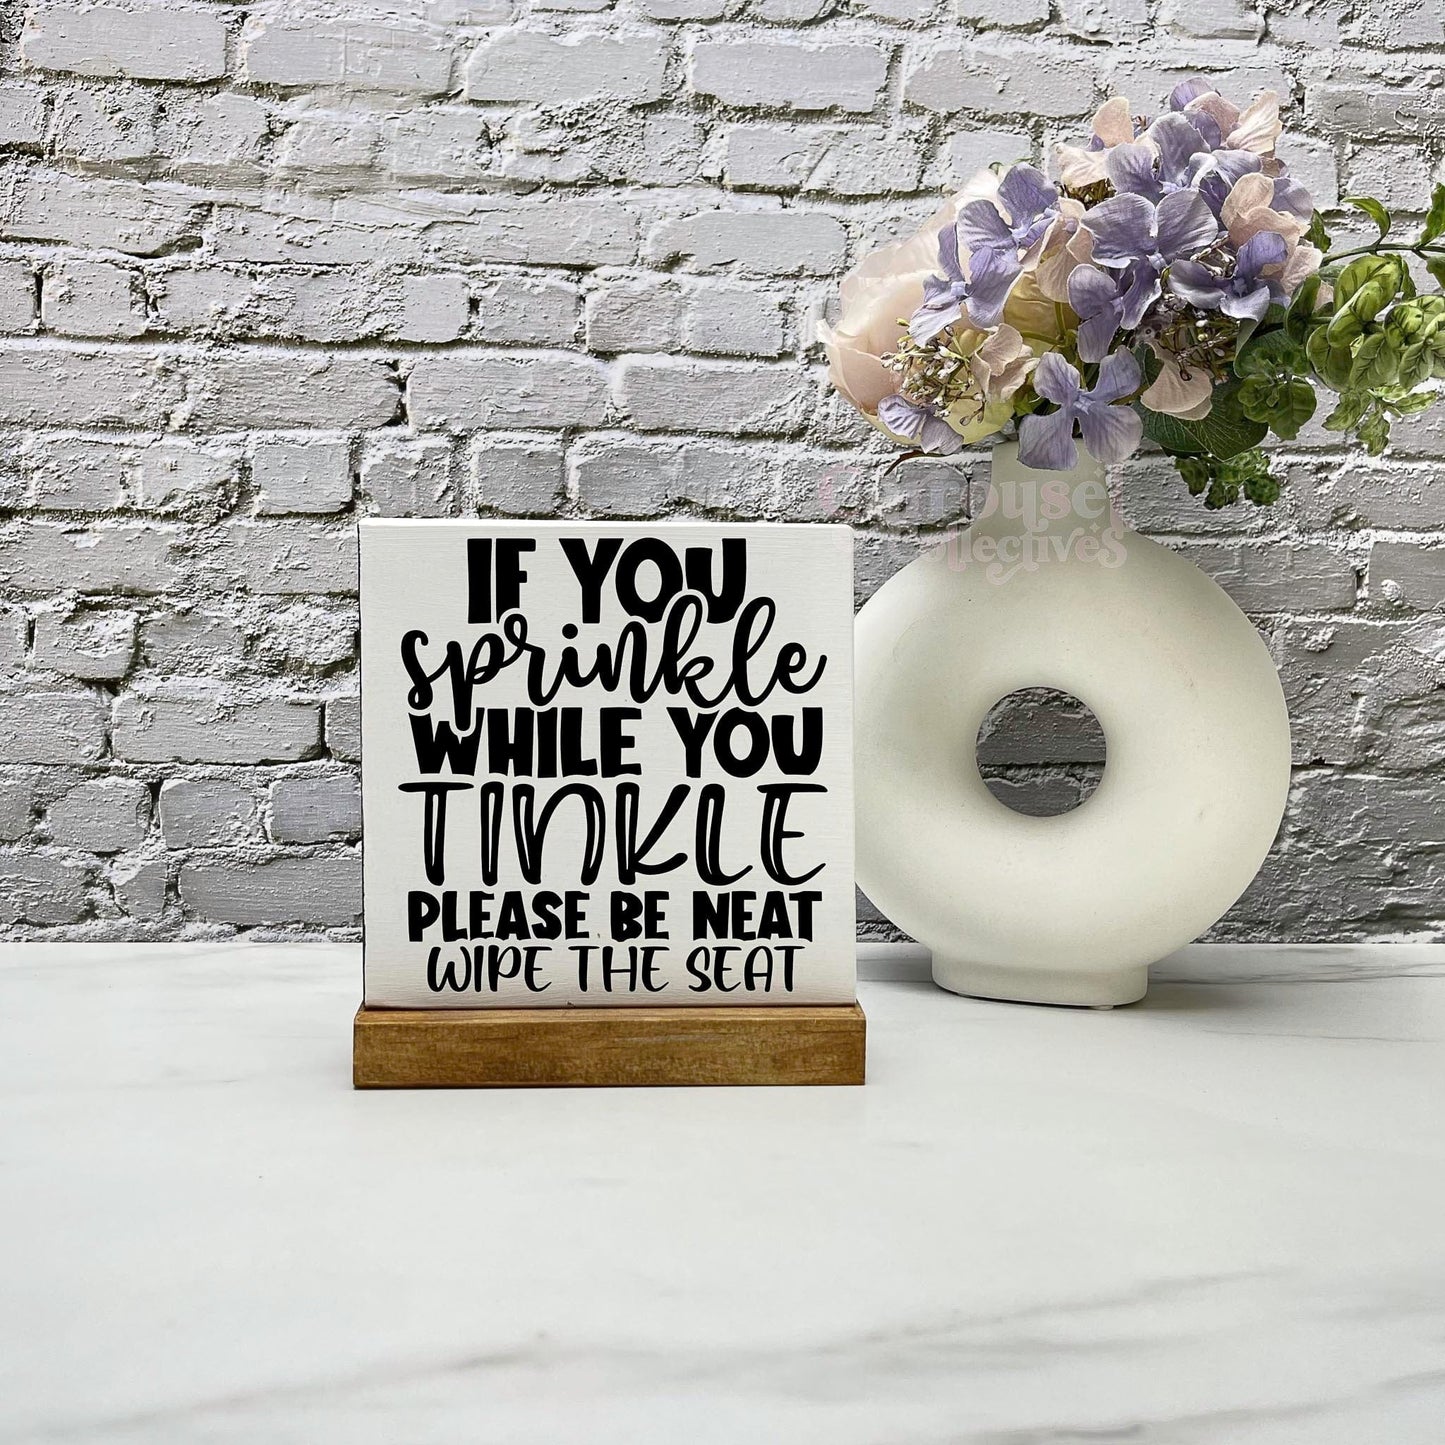 If you sprinkle when you tinkle wood sign, bathroom wood sign, bathroom decor